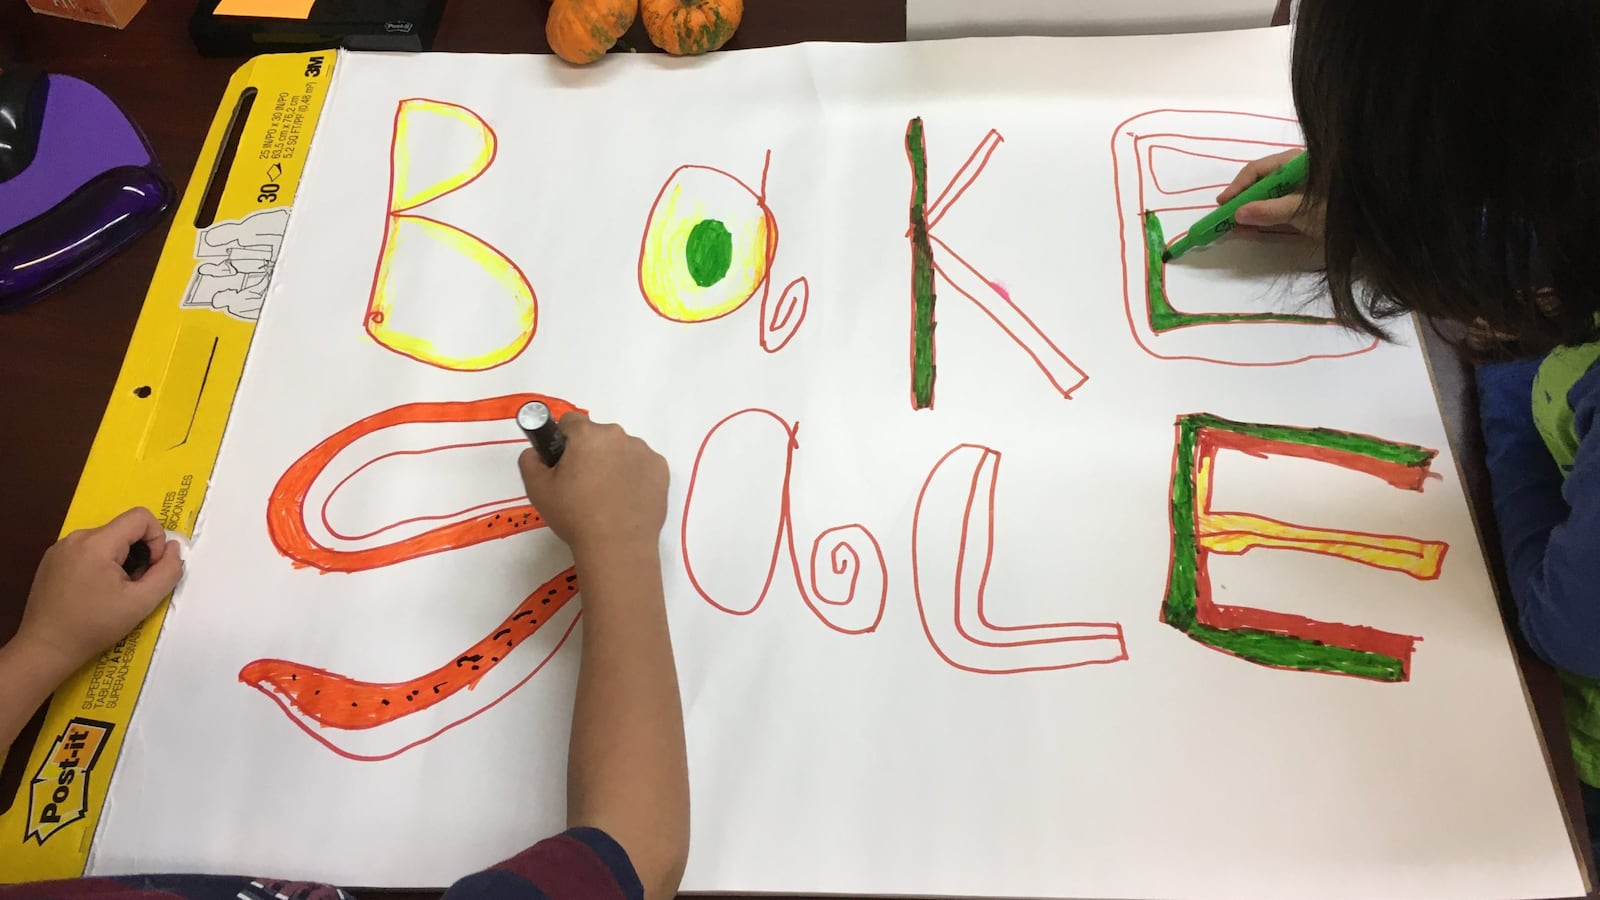 Children help color a bake sale sign for a PTA fundraiser at New York City’s P.S. 165.